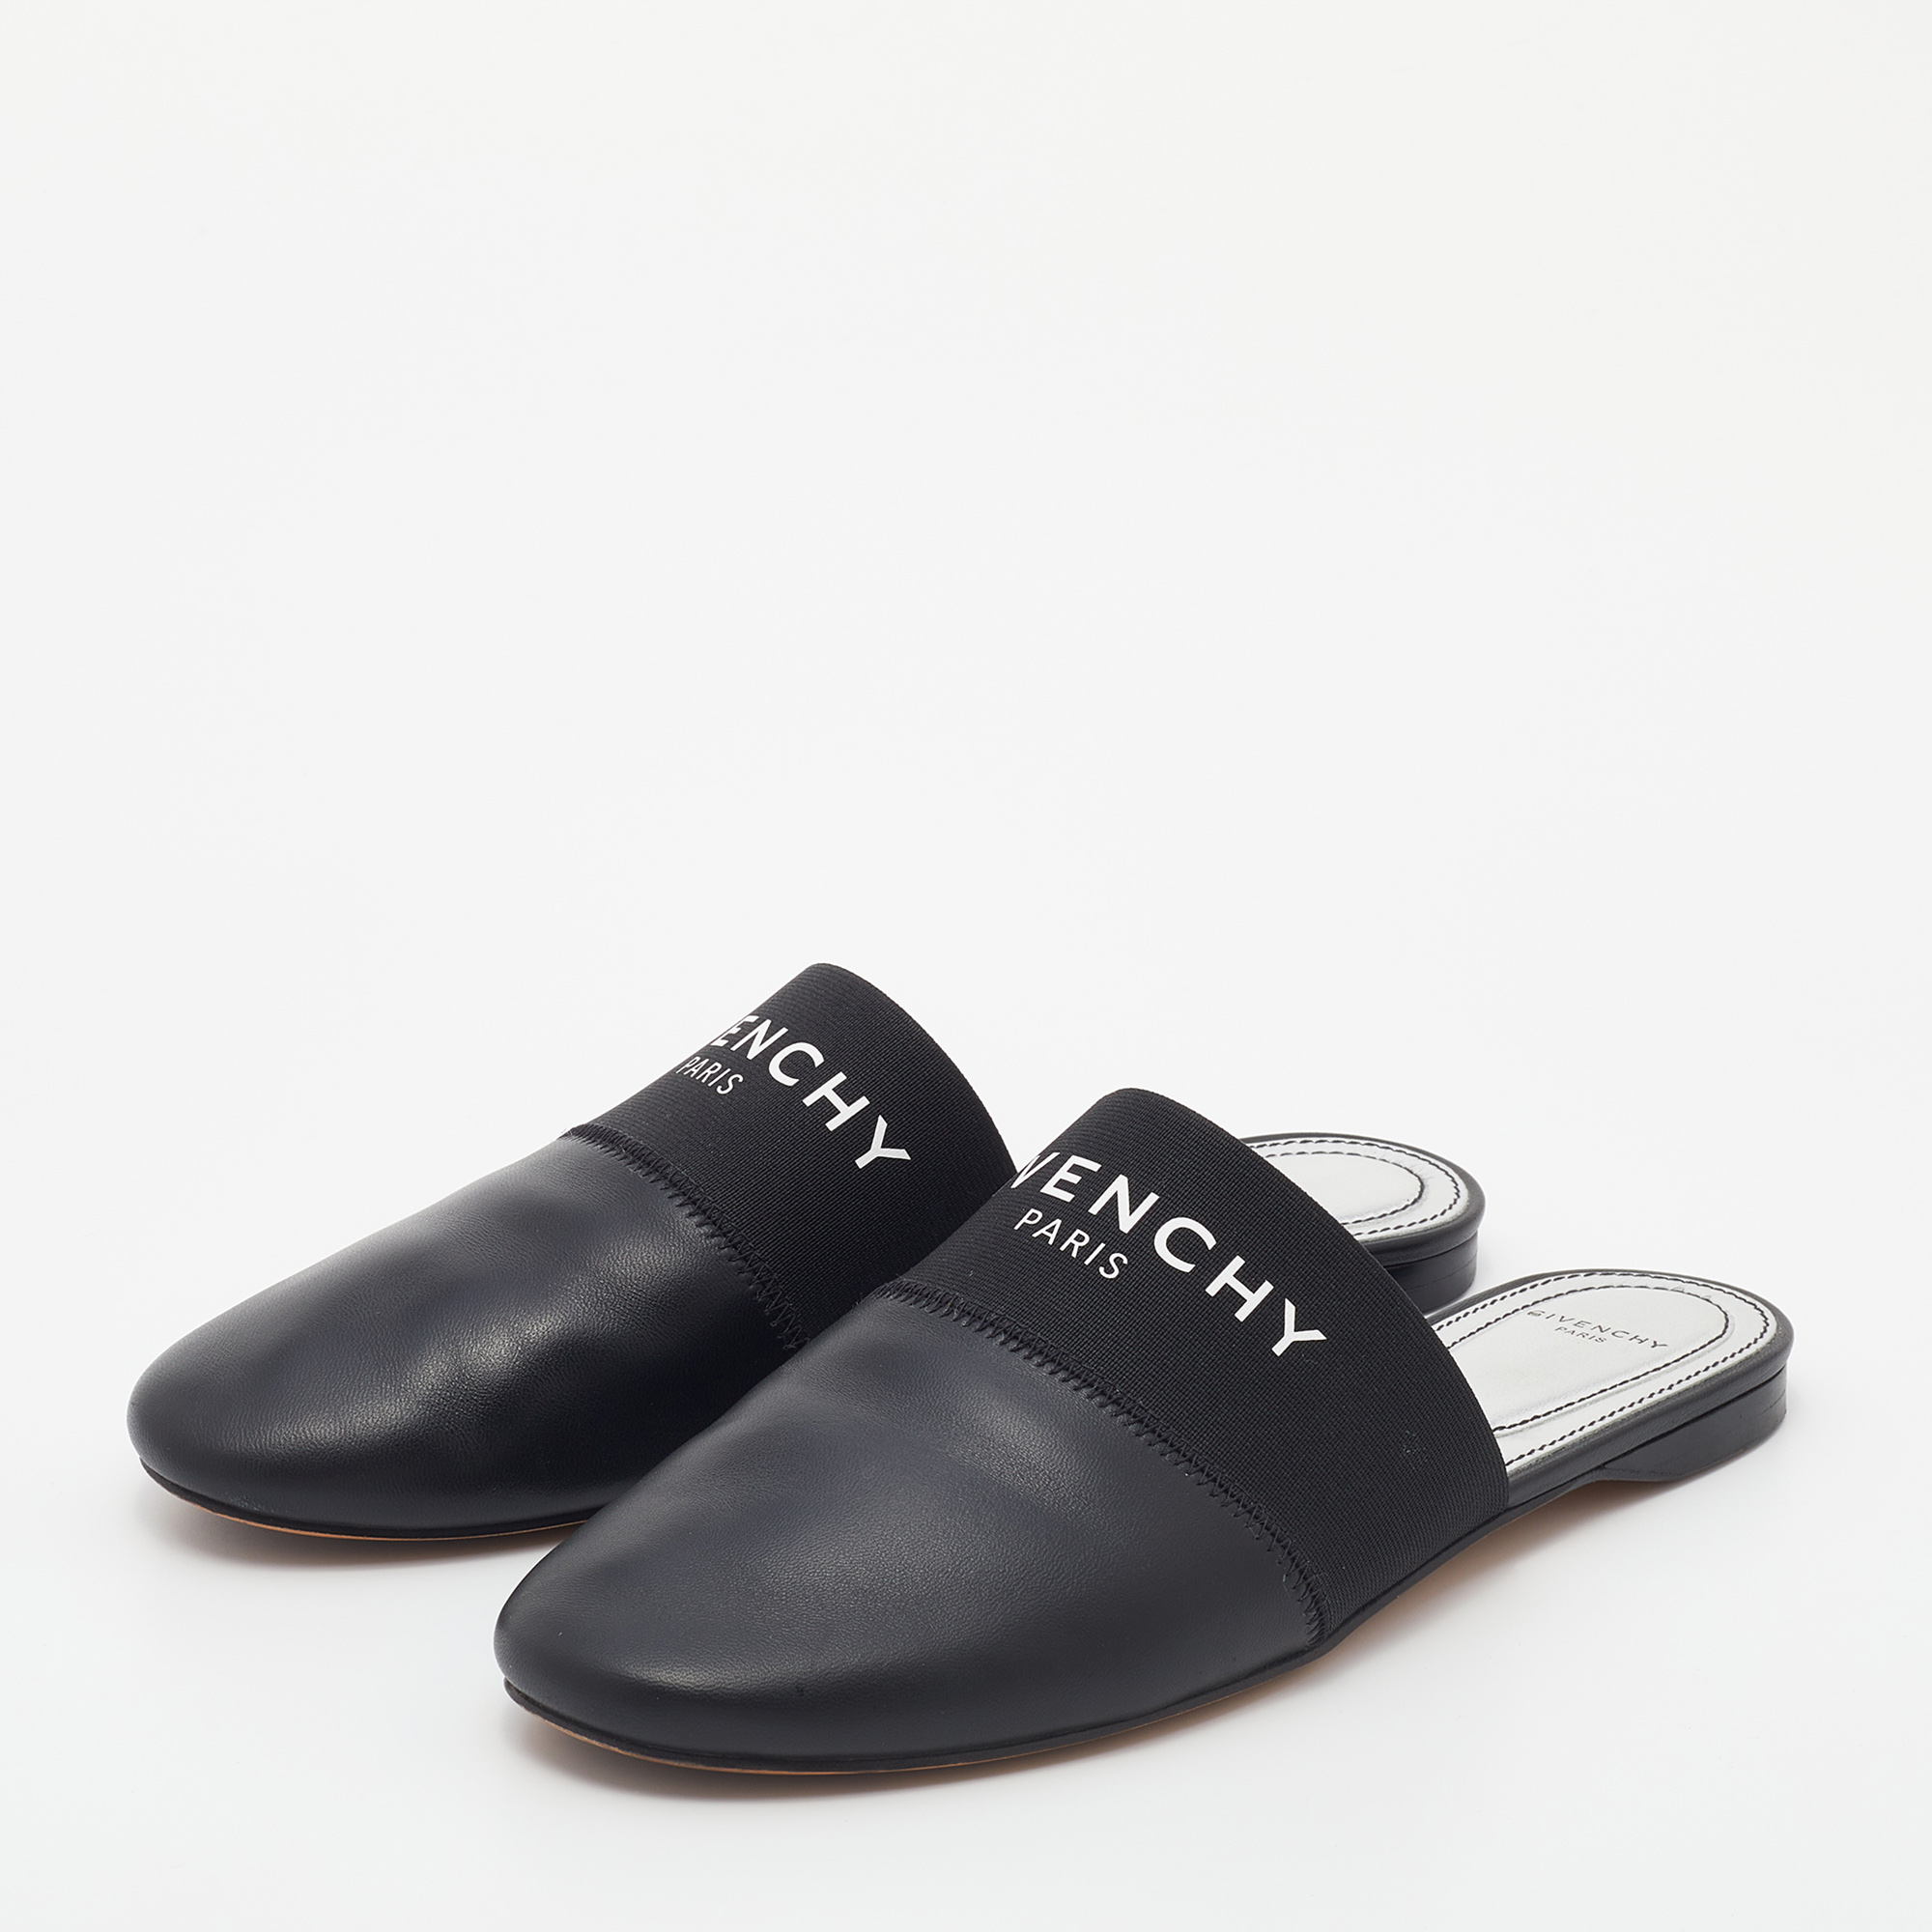 

Givenchy Black Leather Bedford Flat Mules Size